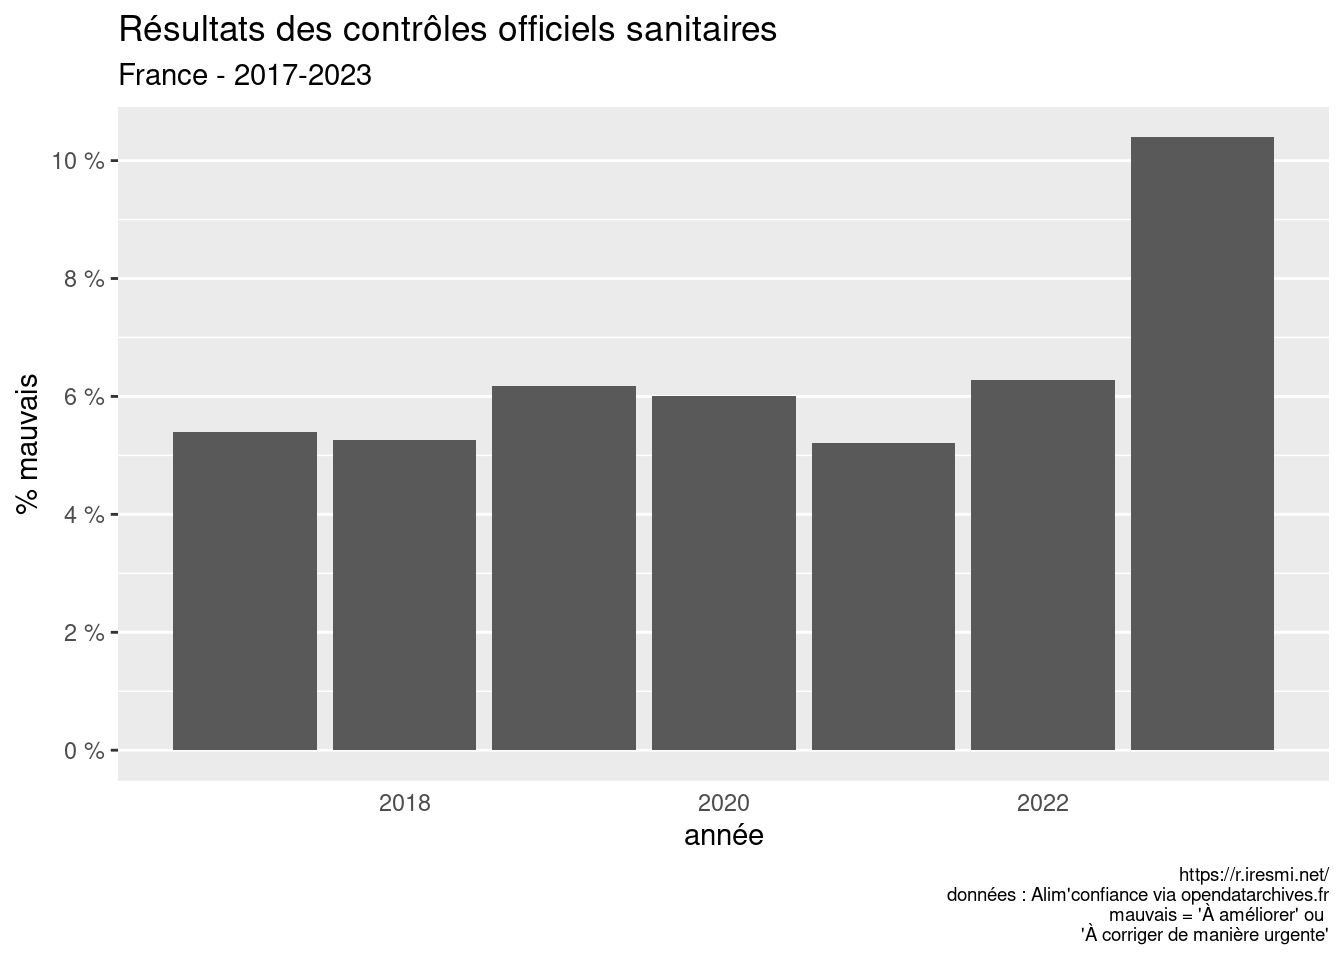 A bar plot of bad controls by year